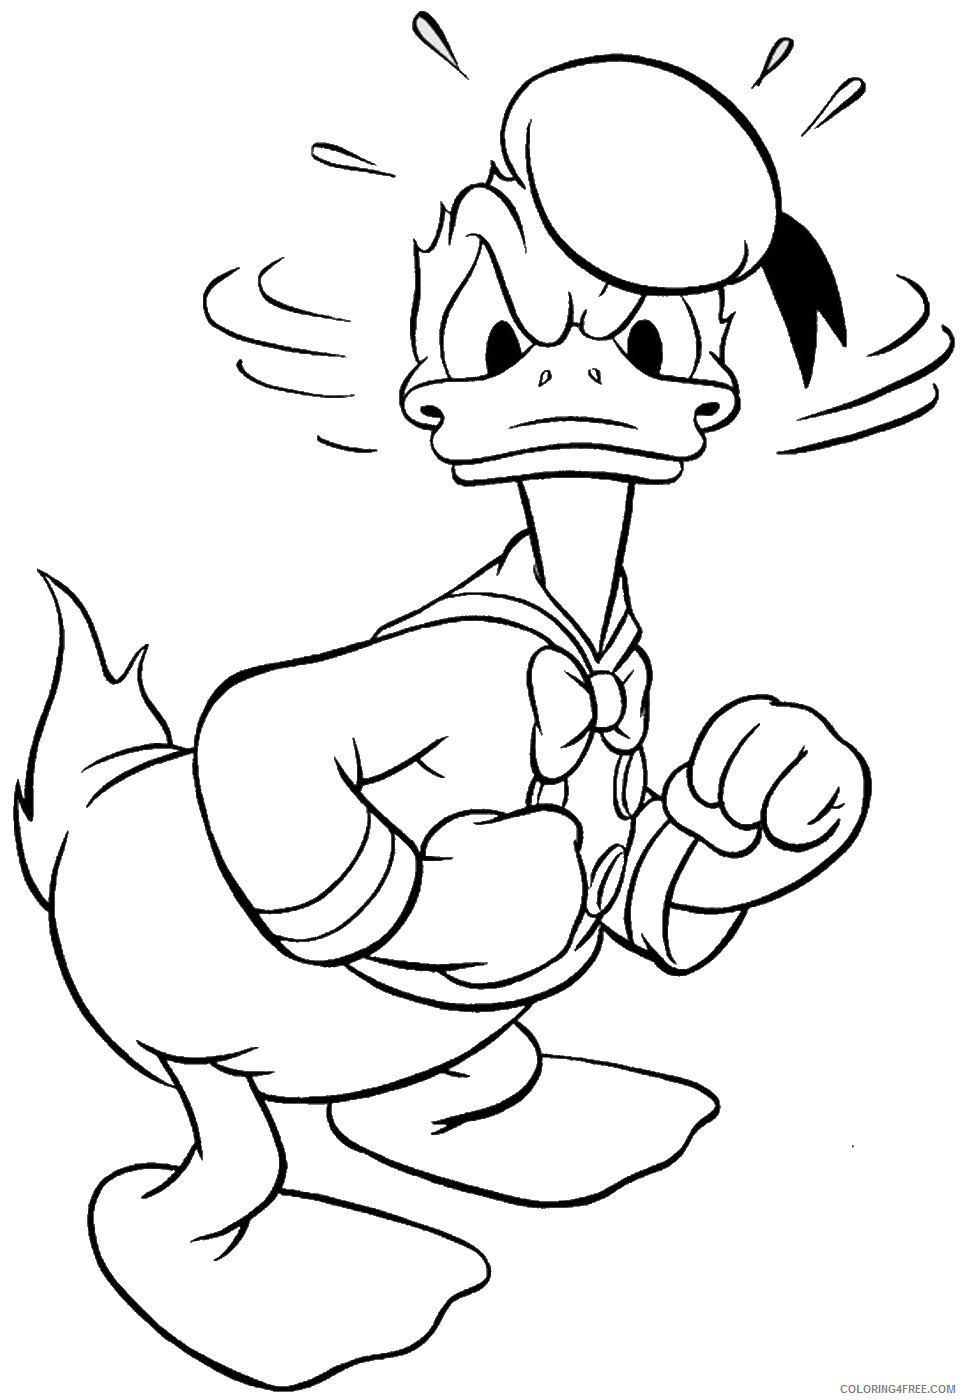 Donald Duck Coloring Pages Cartoons donald_38 Printable 2020 2521 Coloring4free